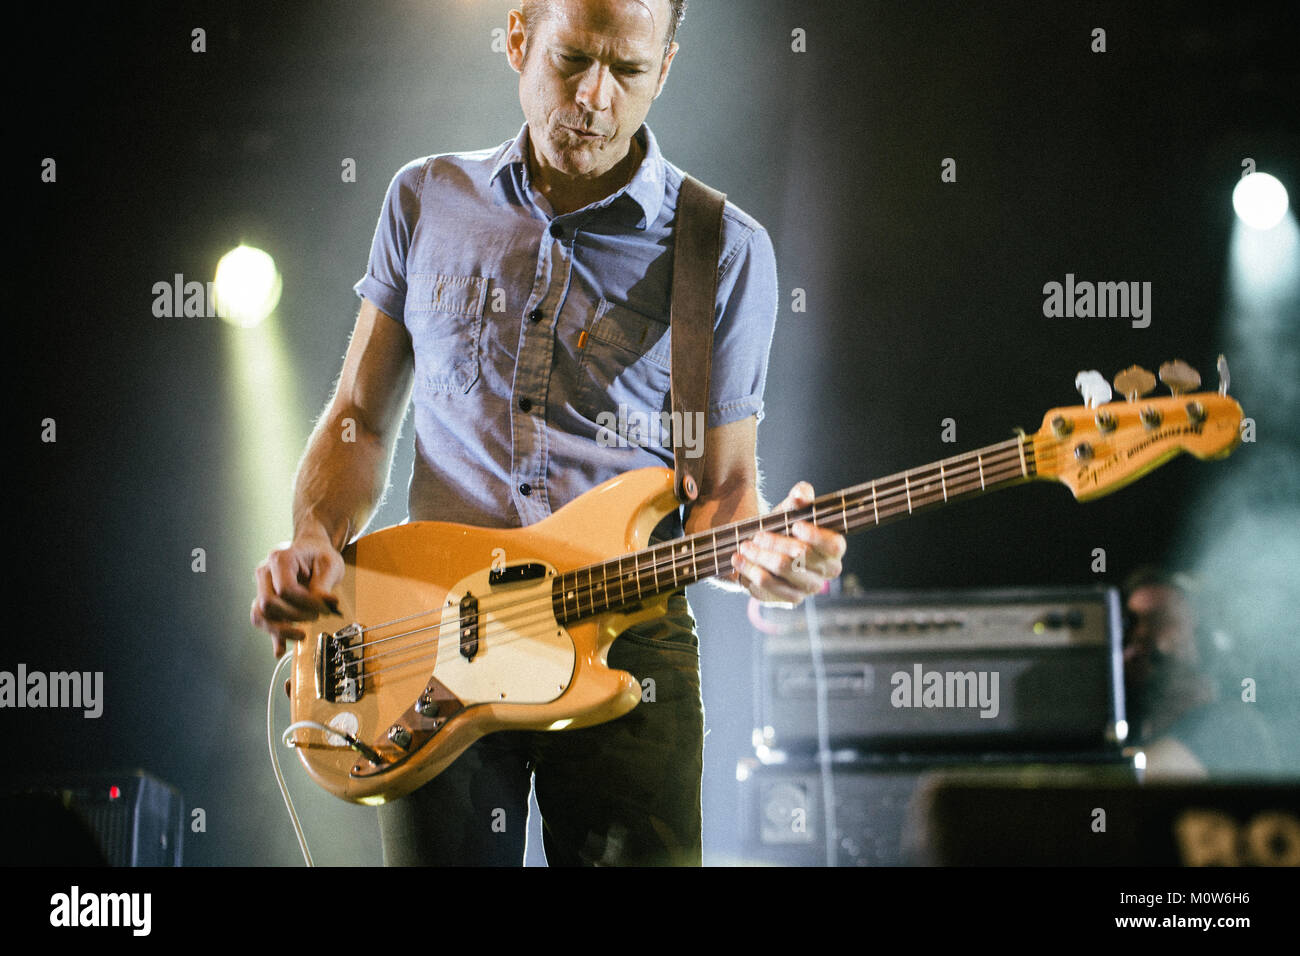 The American indie rock band Deerhunter performs a live concert at the Arena Stage at Roskilde Festival 2014. Here bassist Josh McKay is pictured live on stage. Denmark 06.07.2014. Stock Photo